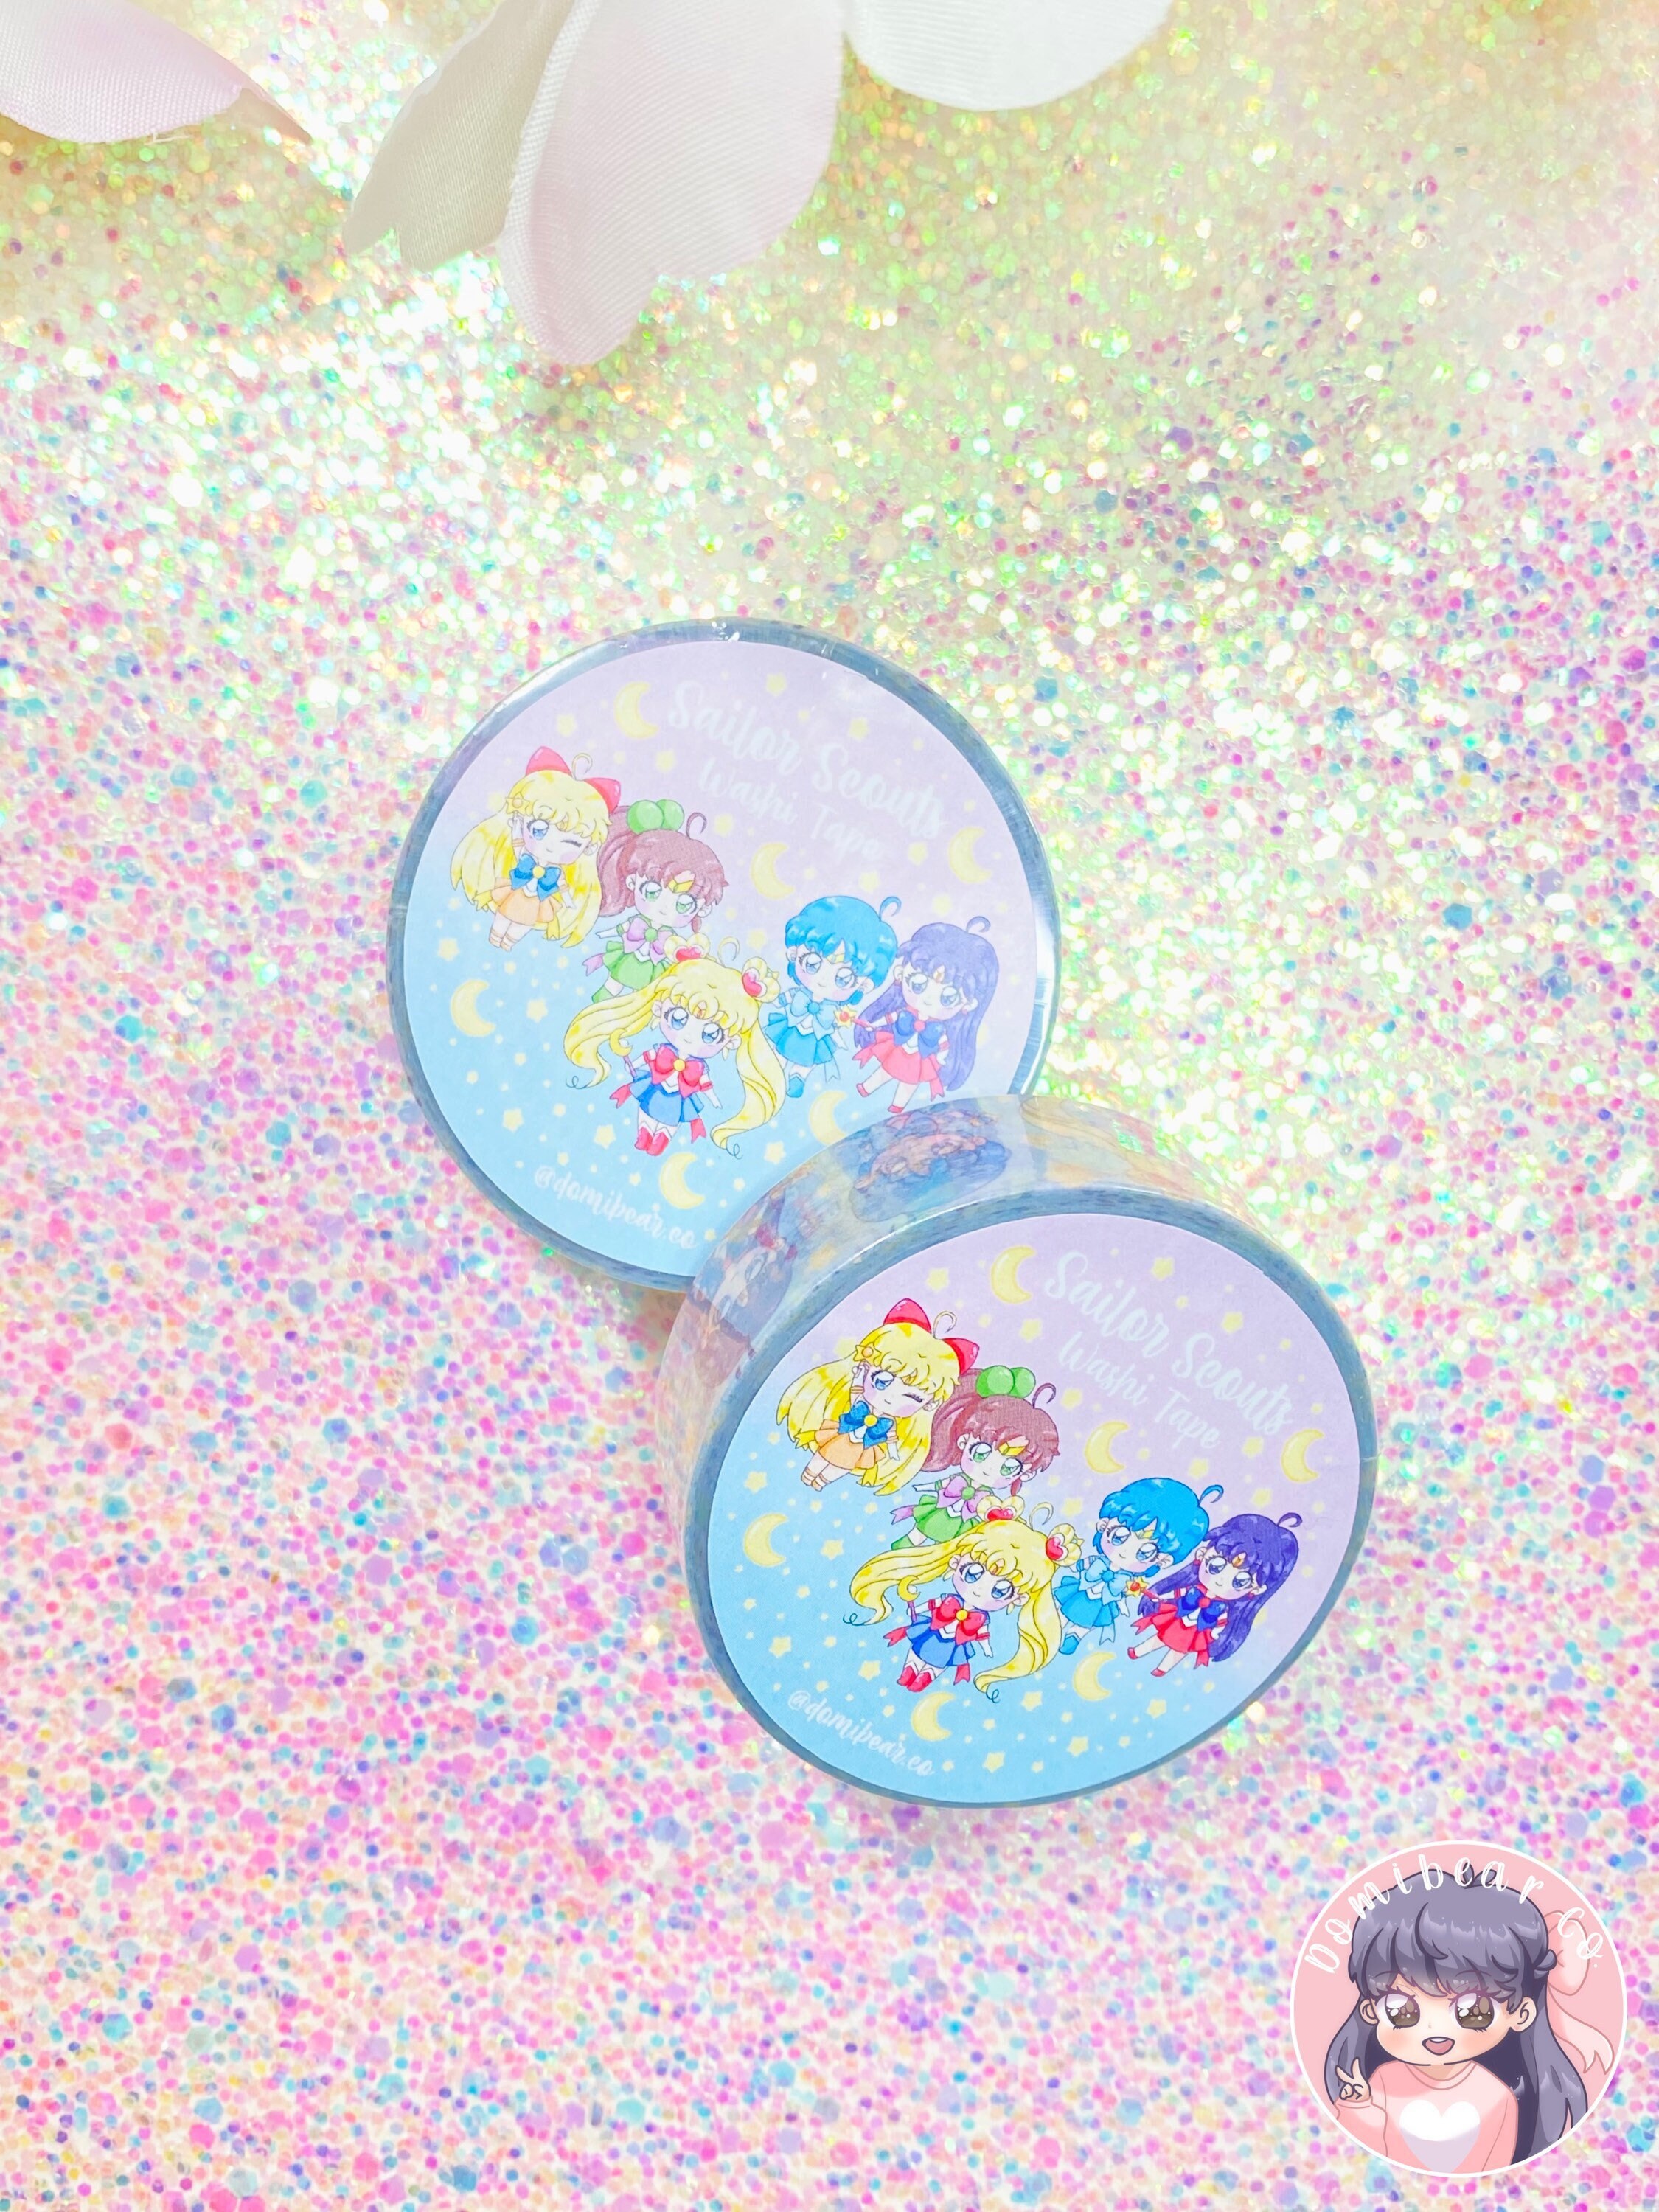 Sailor Moon Washi Tape. Kawaii Washi Tape. Anime Washi Tape. Planner  Decoration. Paper Tape. Planner Supplies. Cute Washi Tape. Anime. 10M ·  Magsterarts · Online Store Powered by Storenvy